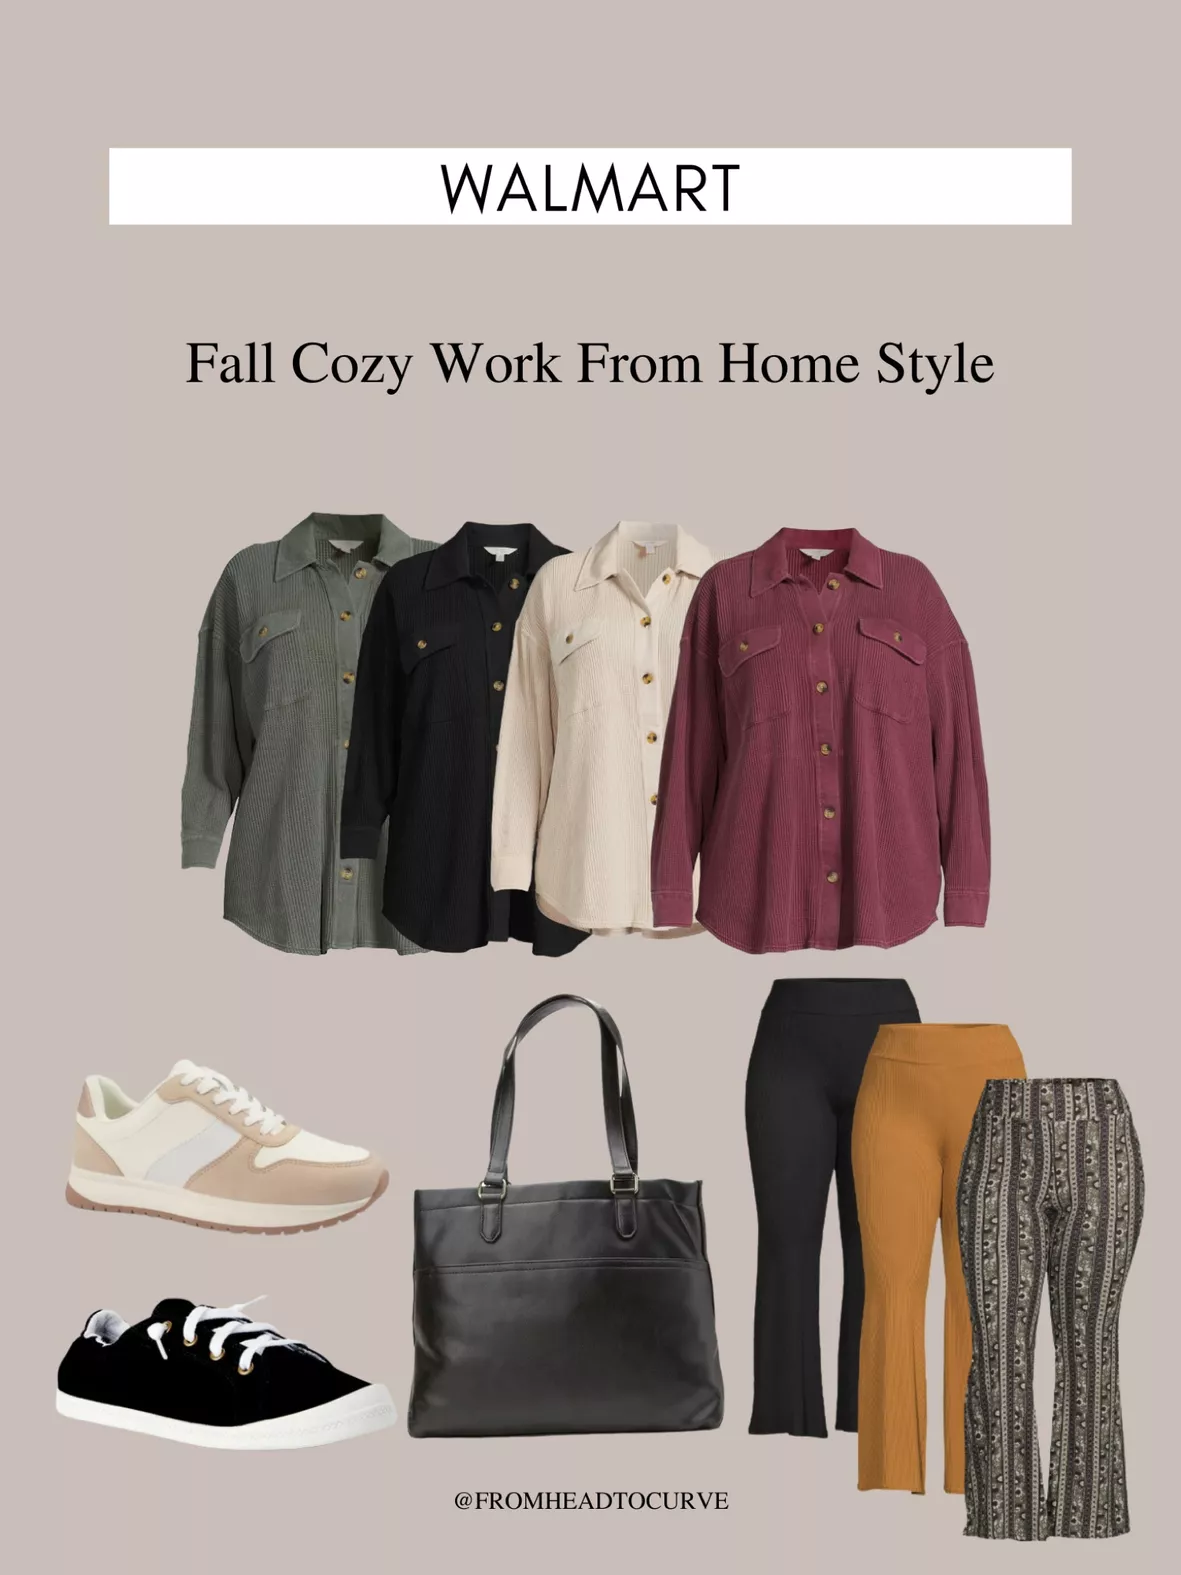 Fall Fashion Inspiration: Stylish Plus Size Outfits for Work